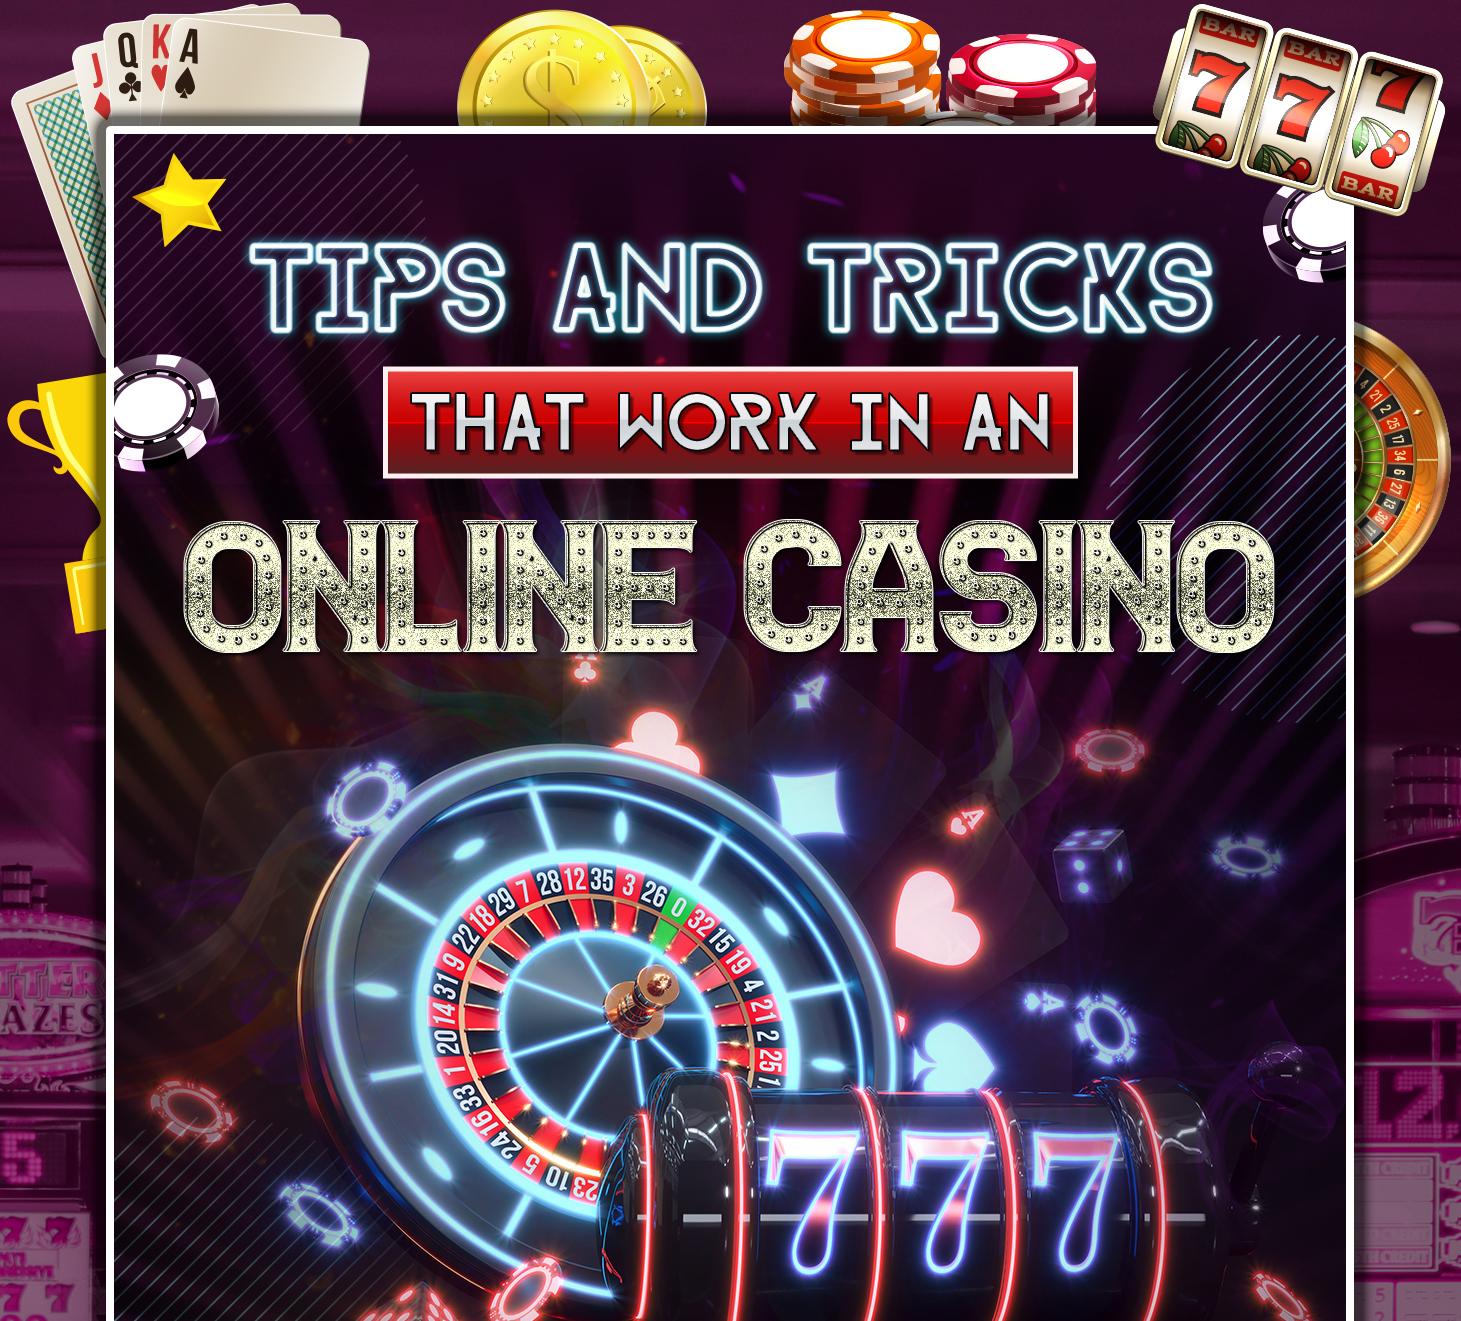 Tips and Tricks that work in an online casino